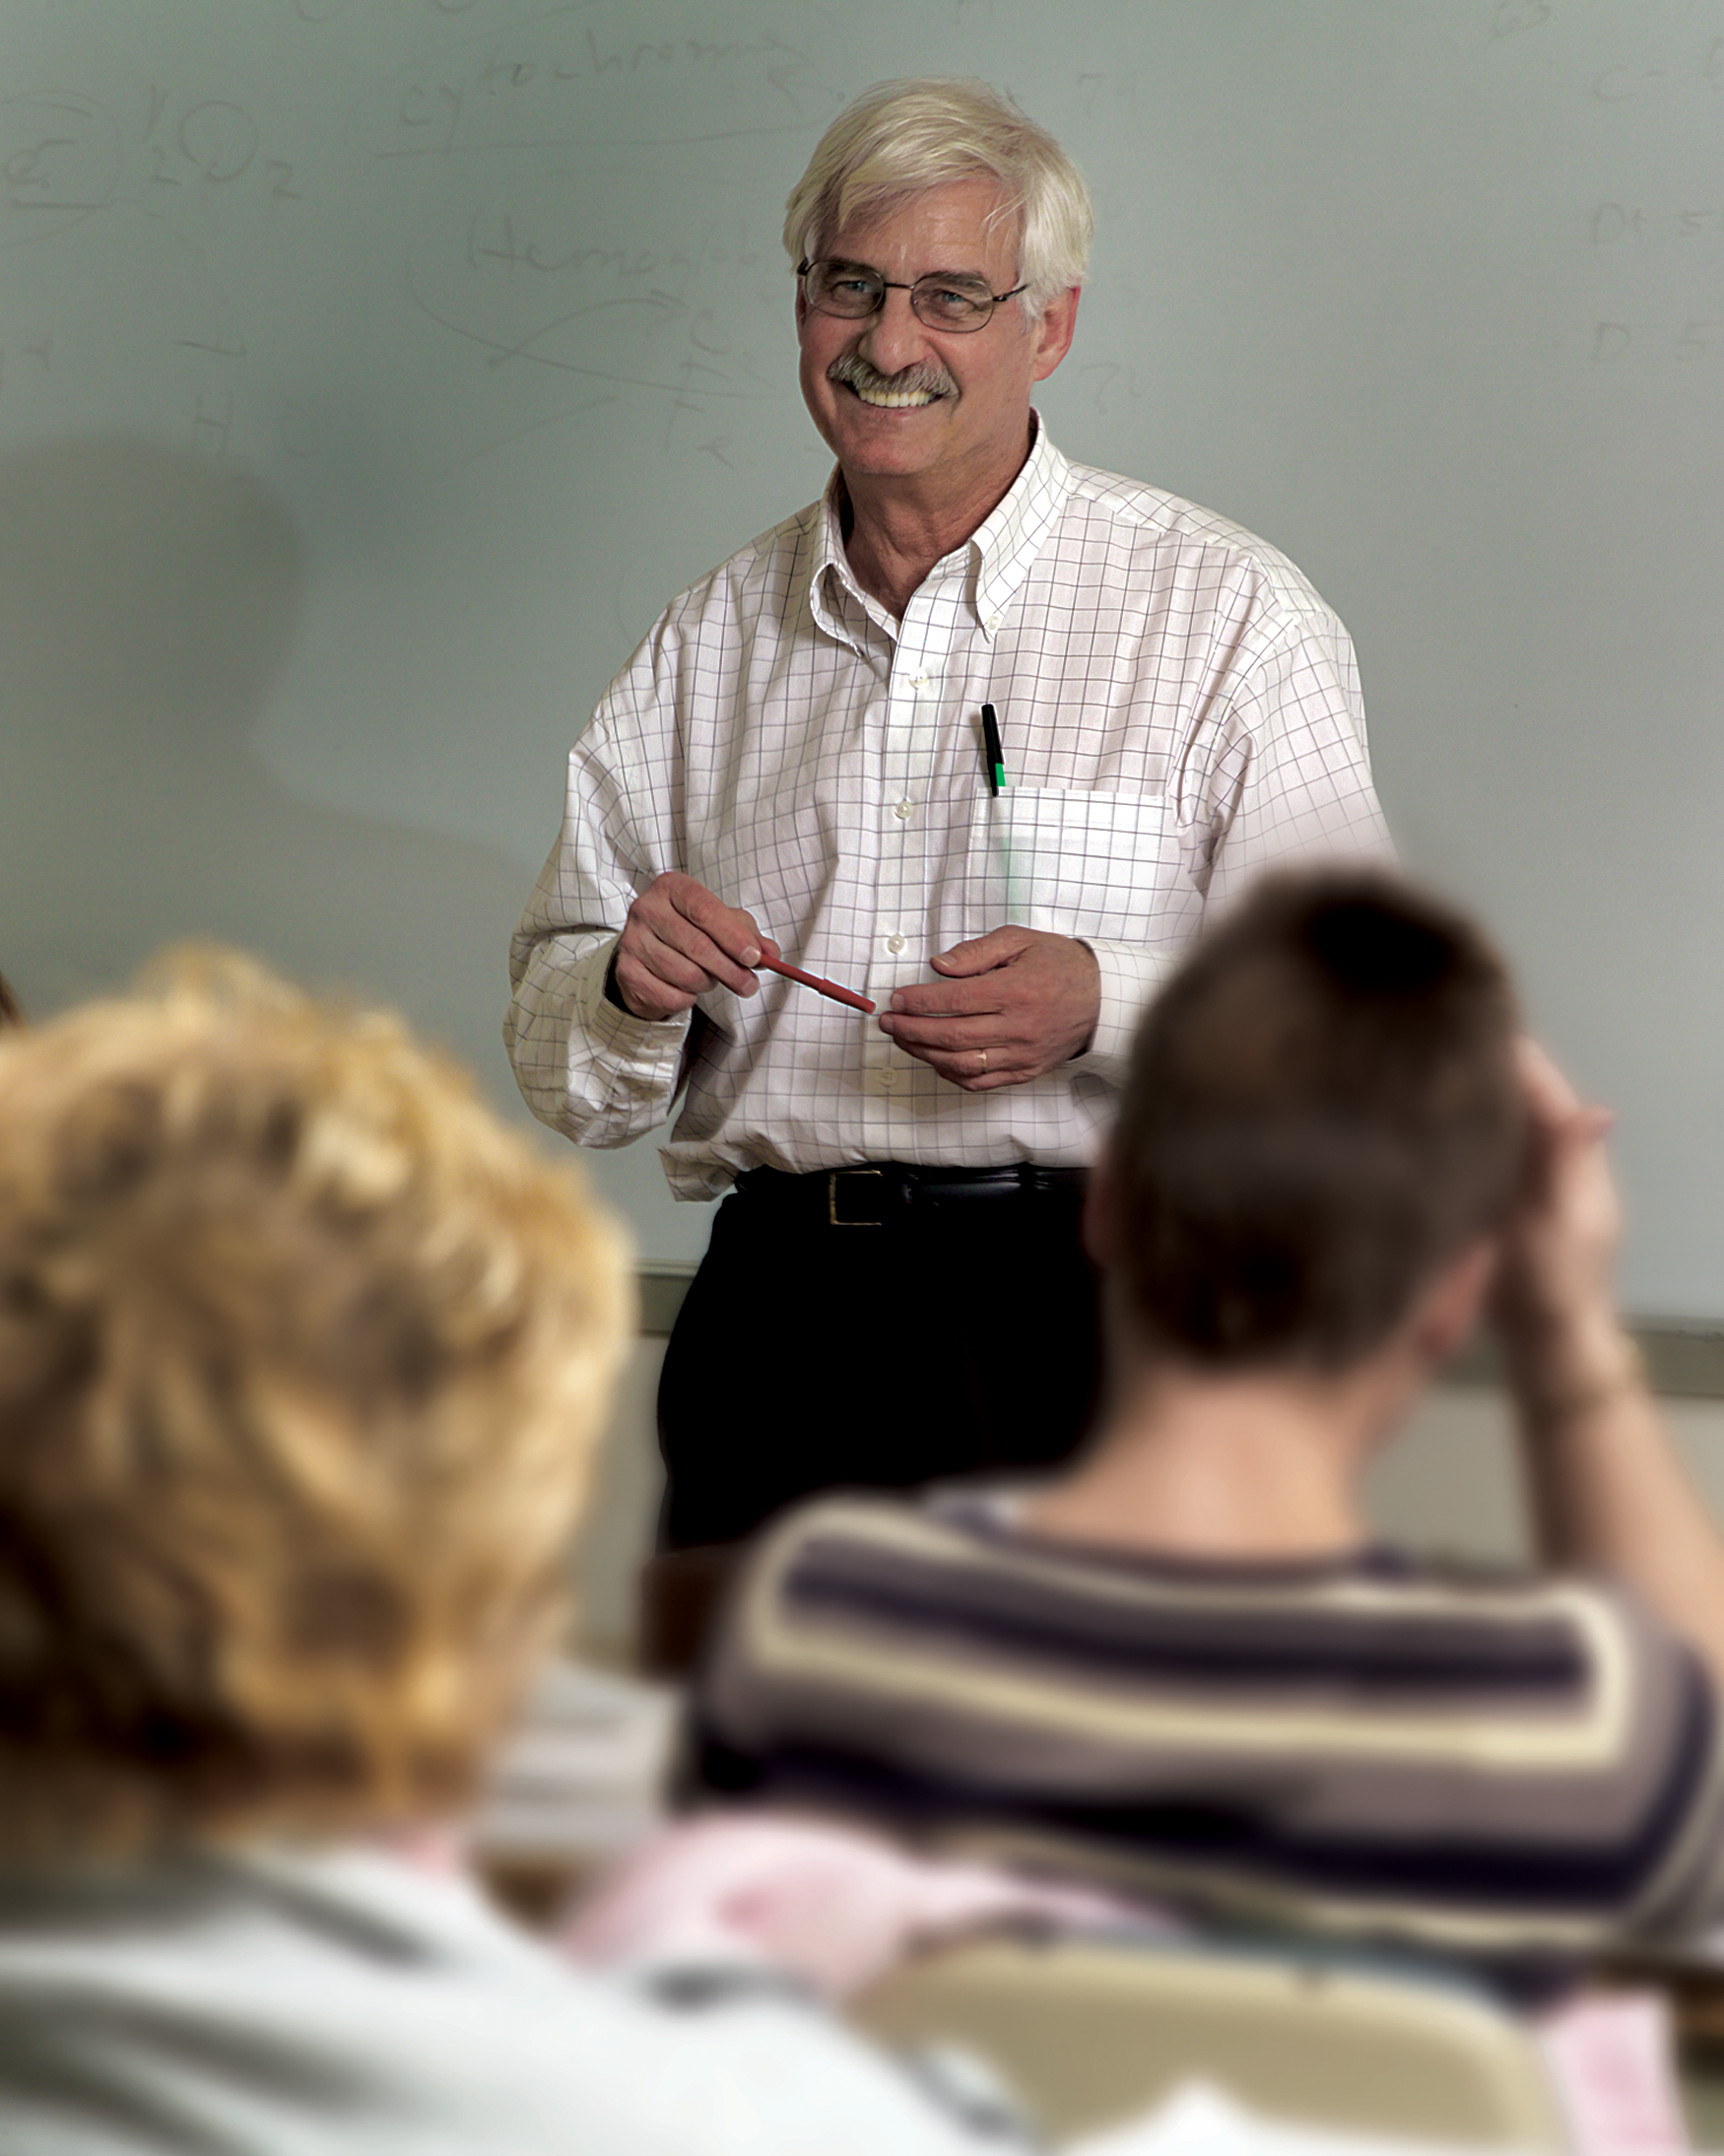 Dr. Michael Hochberg teaching in a classroom